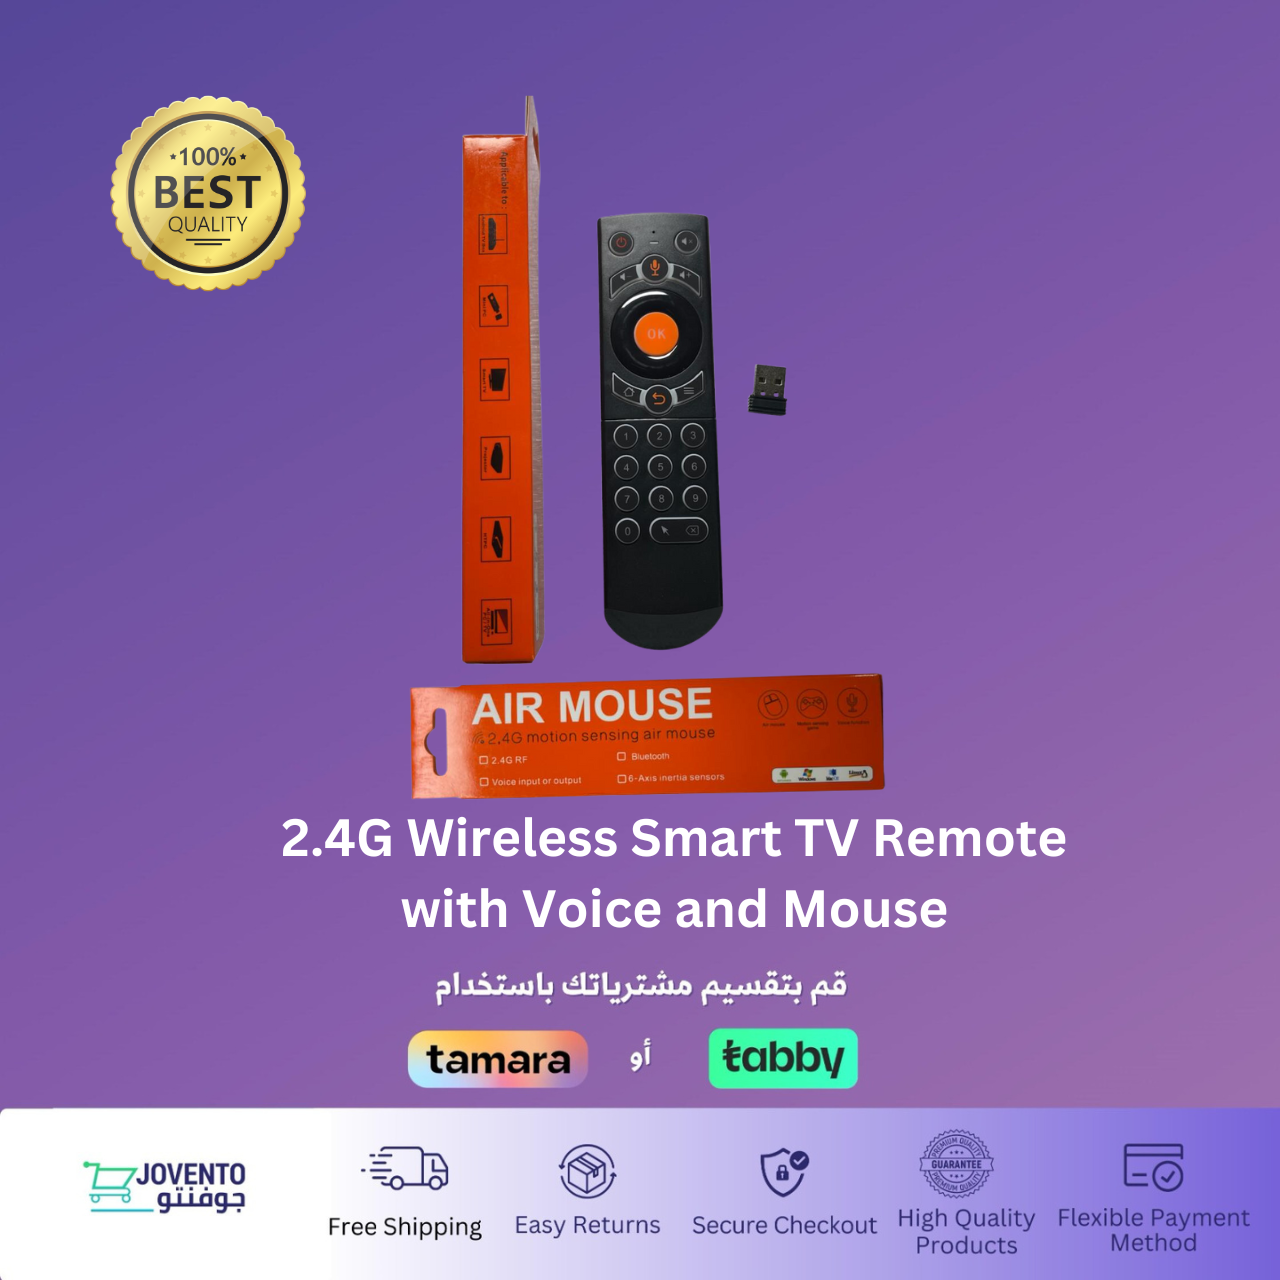 2.4G Wireless Smart TV Remote with Voice and Mouse